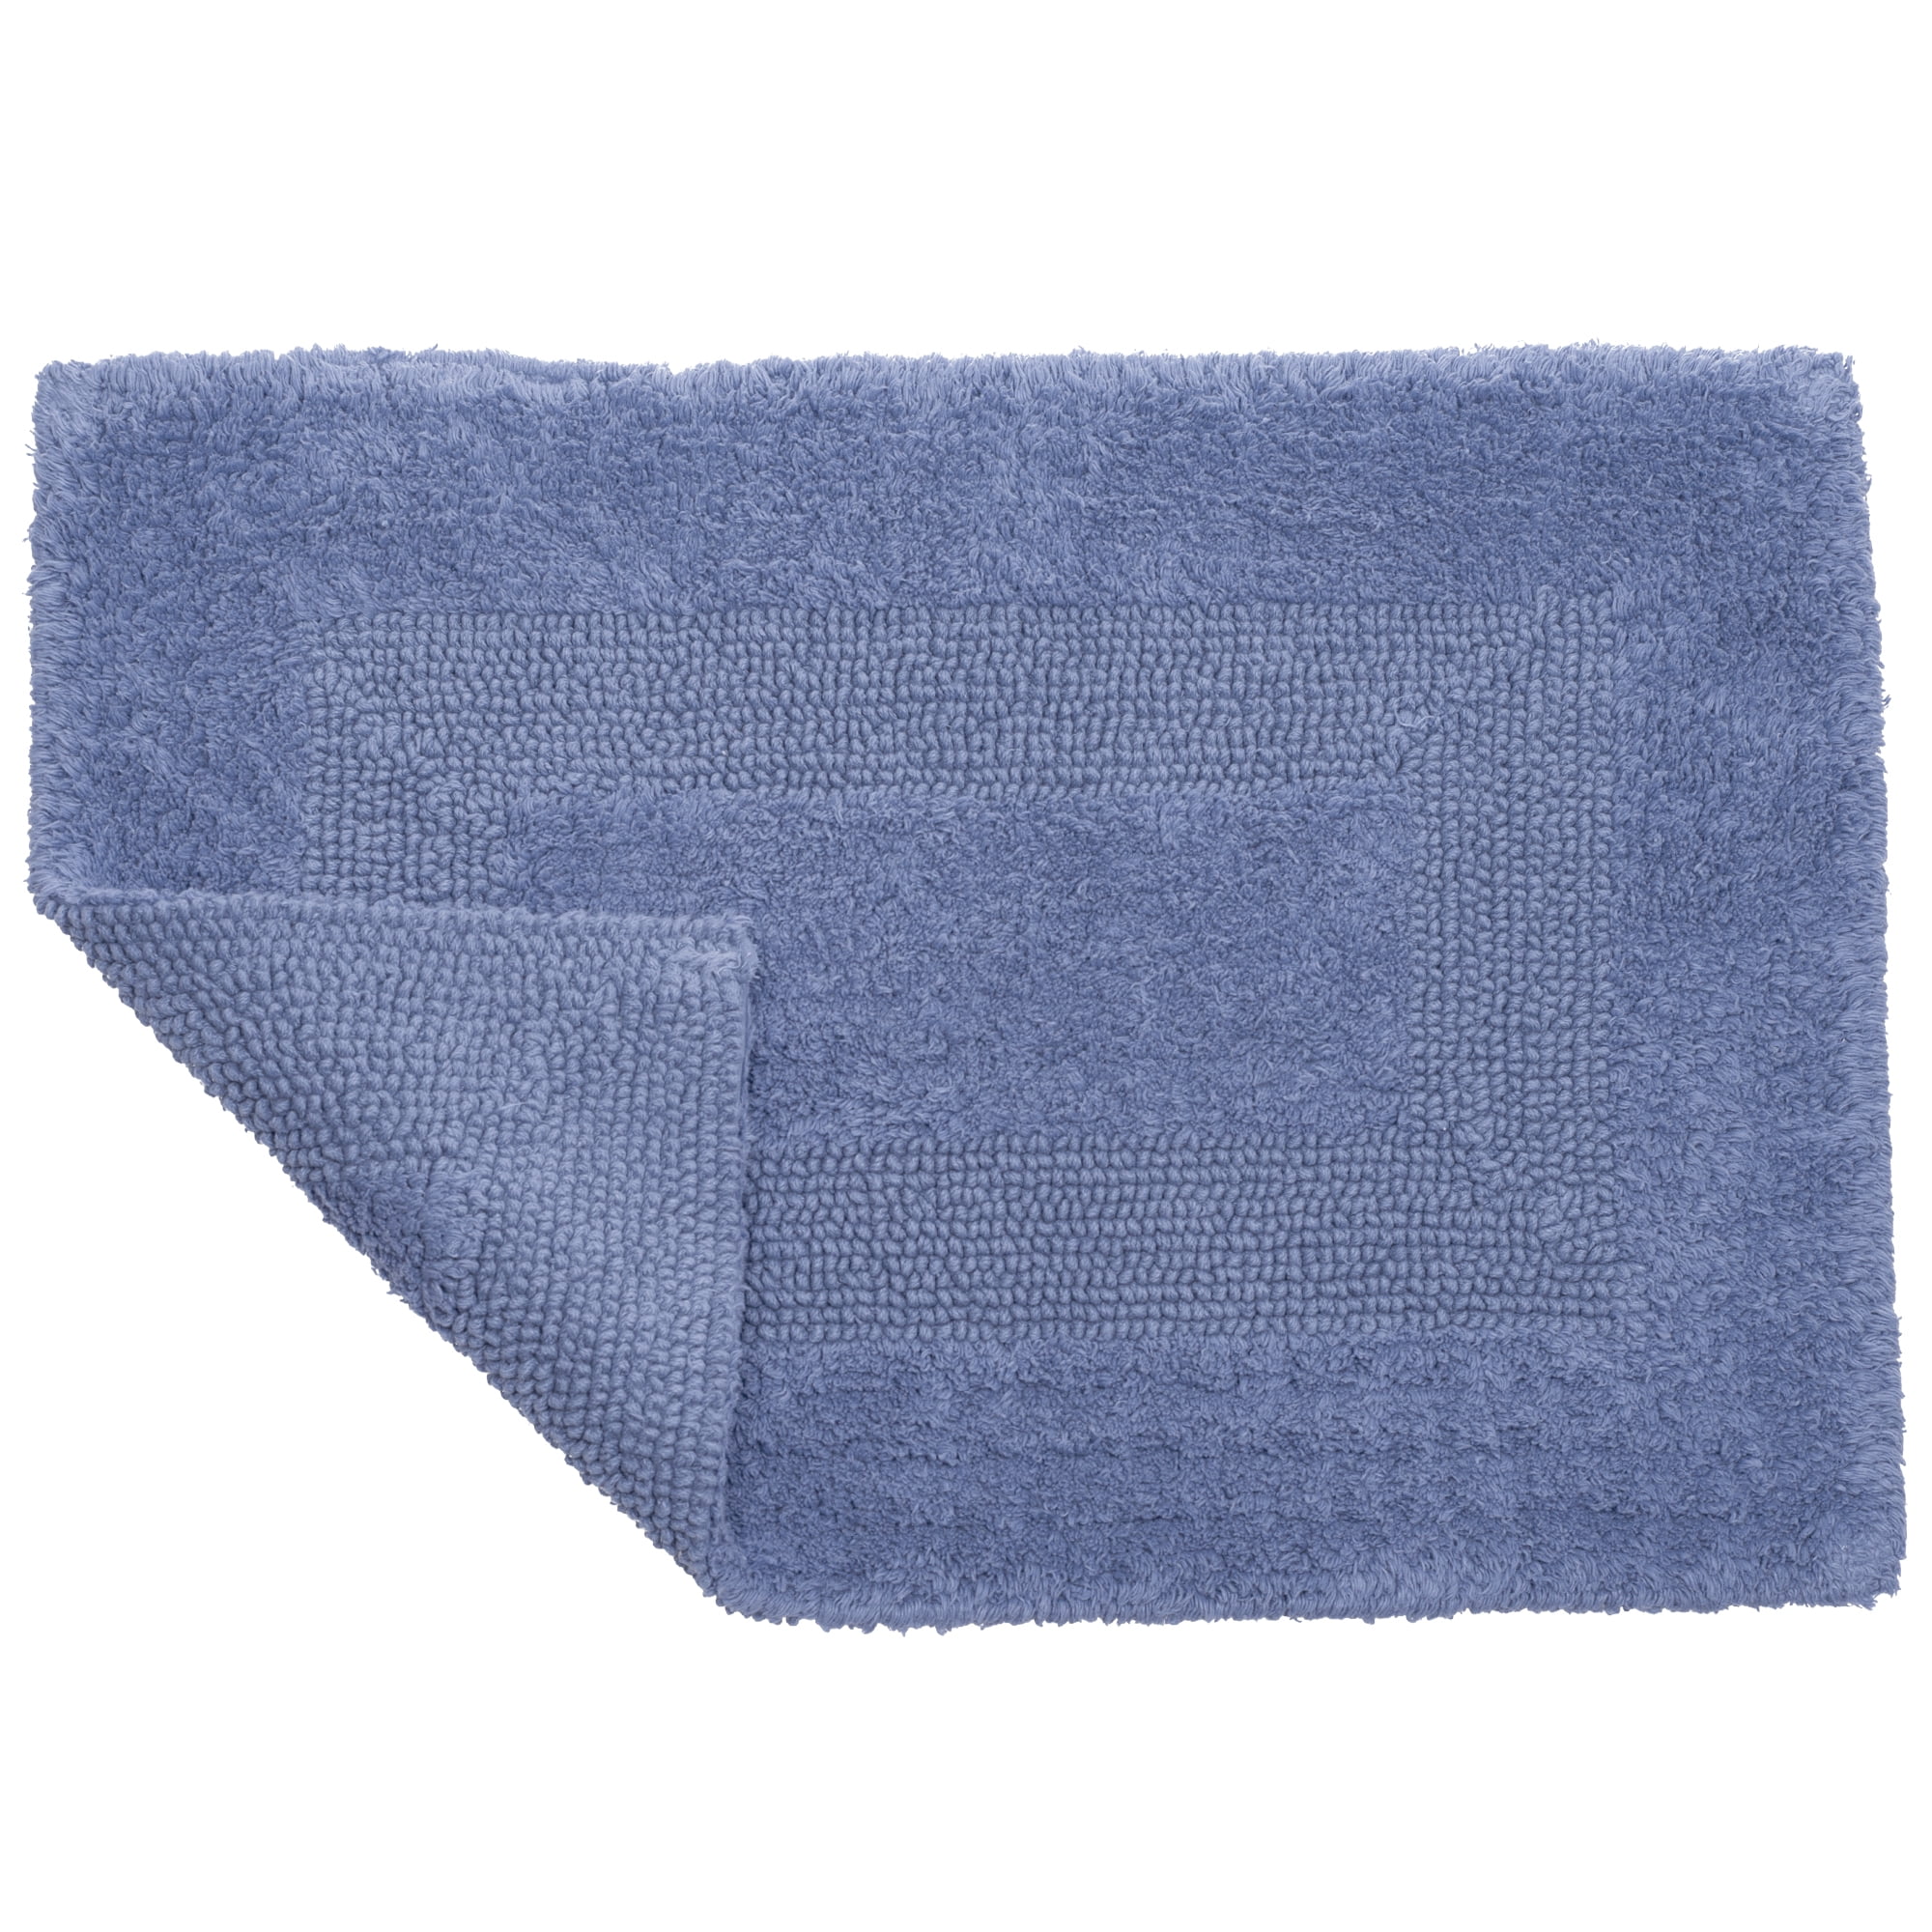 Royalz Collection 2 Pack Blue Floor Towels for Bathroom – 22x34 Inches, 820  GSM - 100% Cotton, Luxury Bath Mat Towel (Not a Bathroom Rug) Easy to Wash